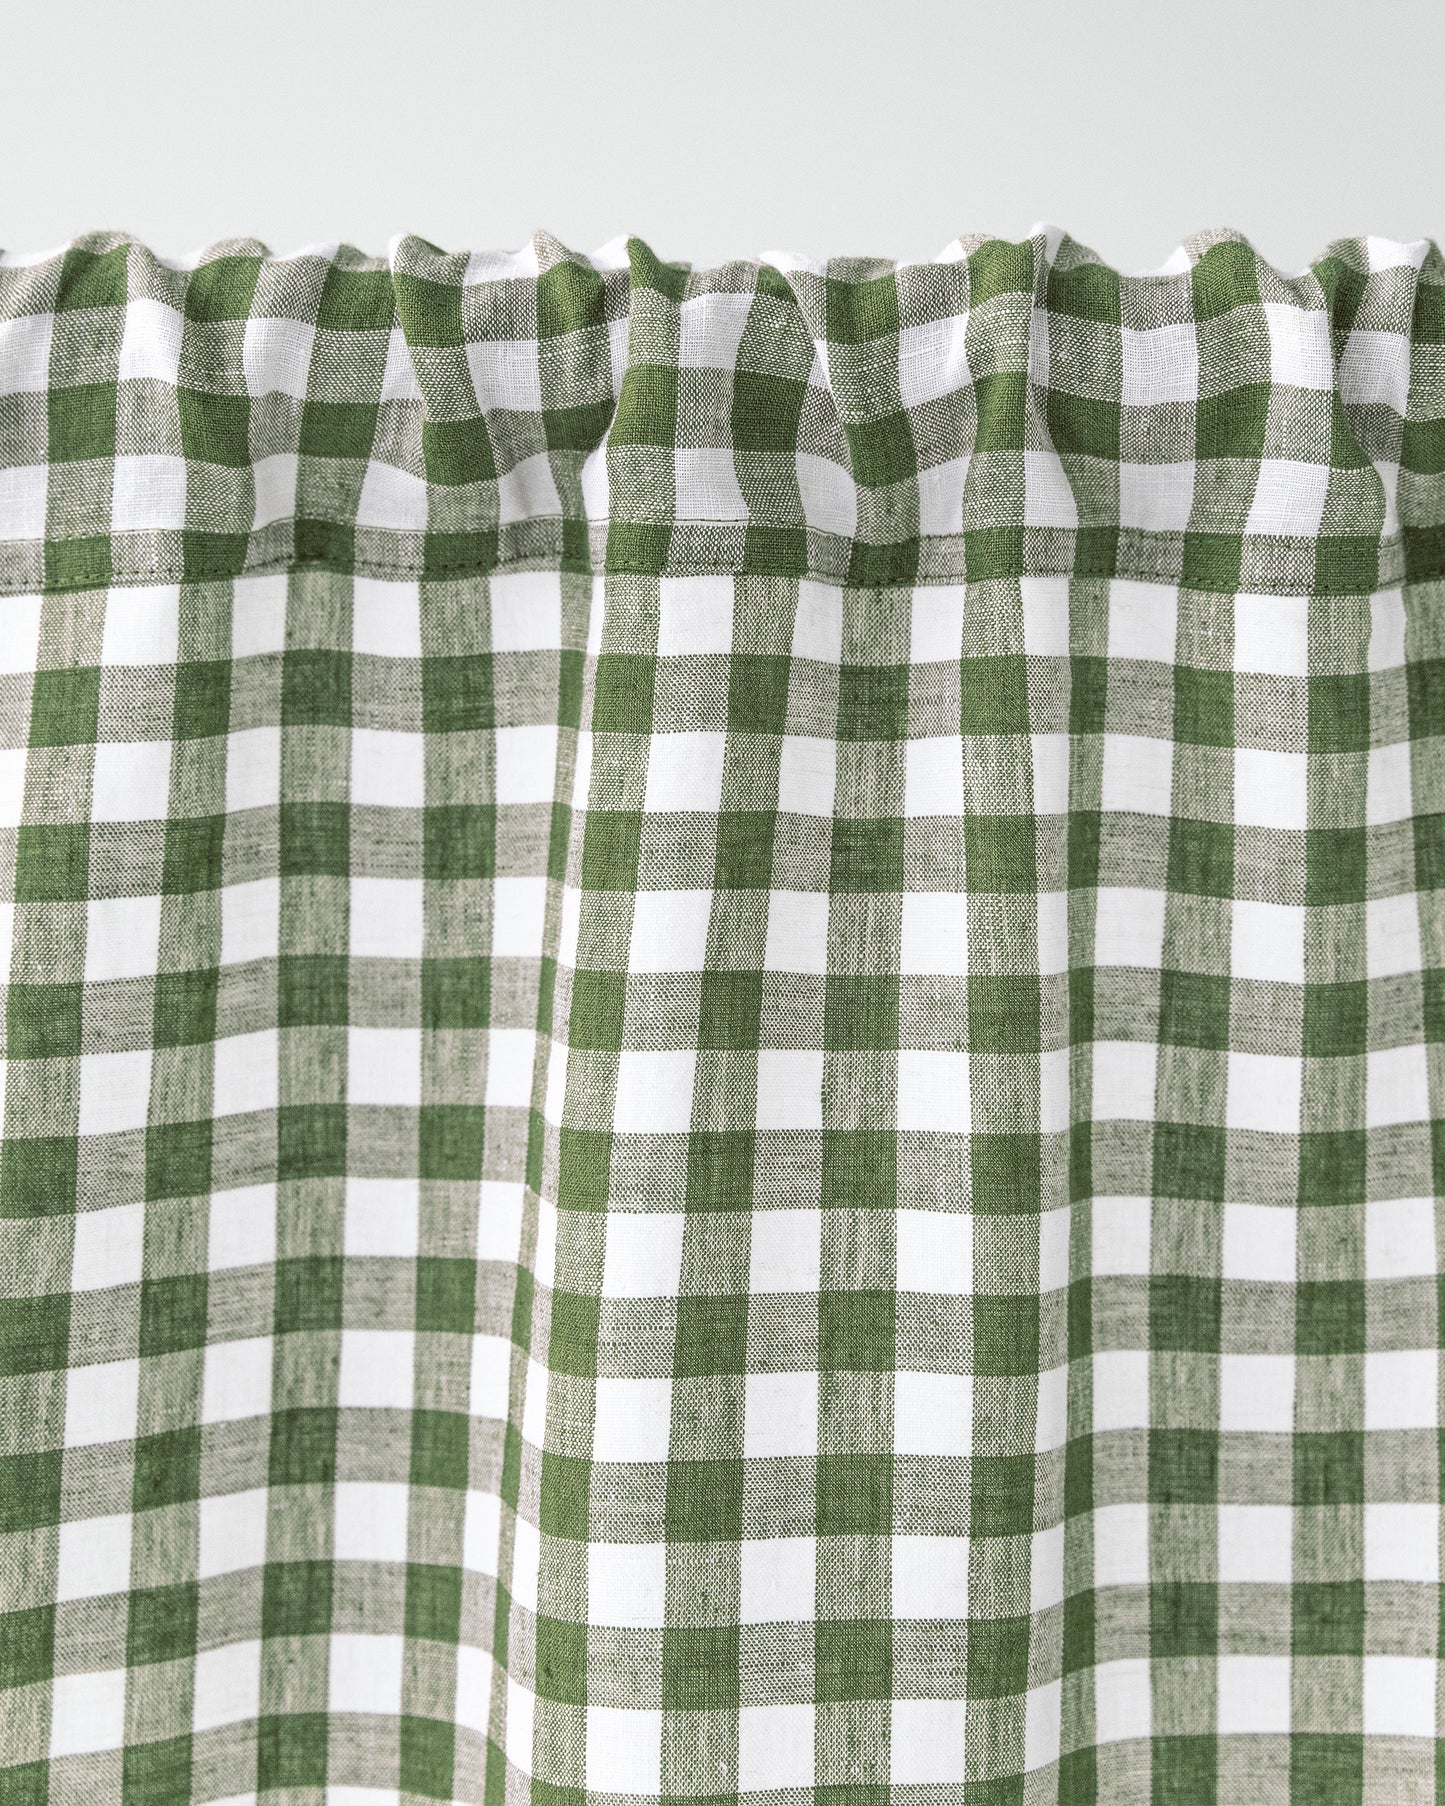 Rod pocket linen curtain panel (1 pcs) in Forest green gingham - MagicLinen